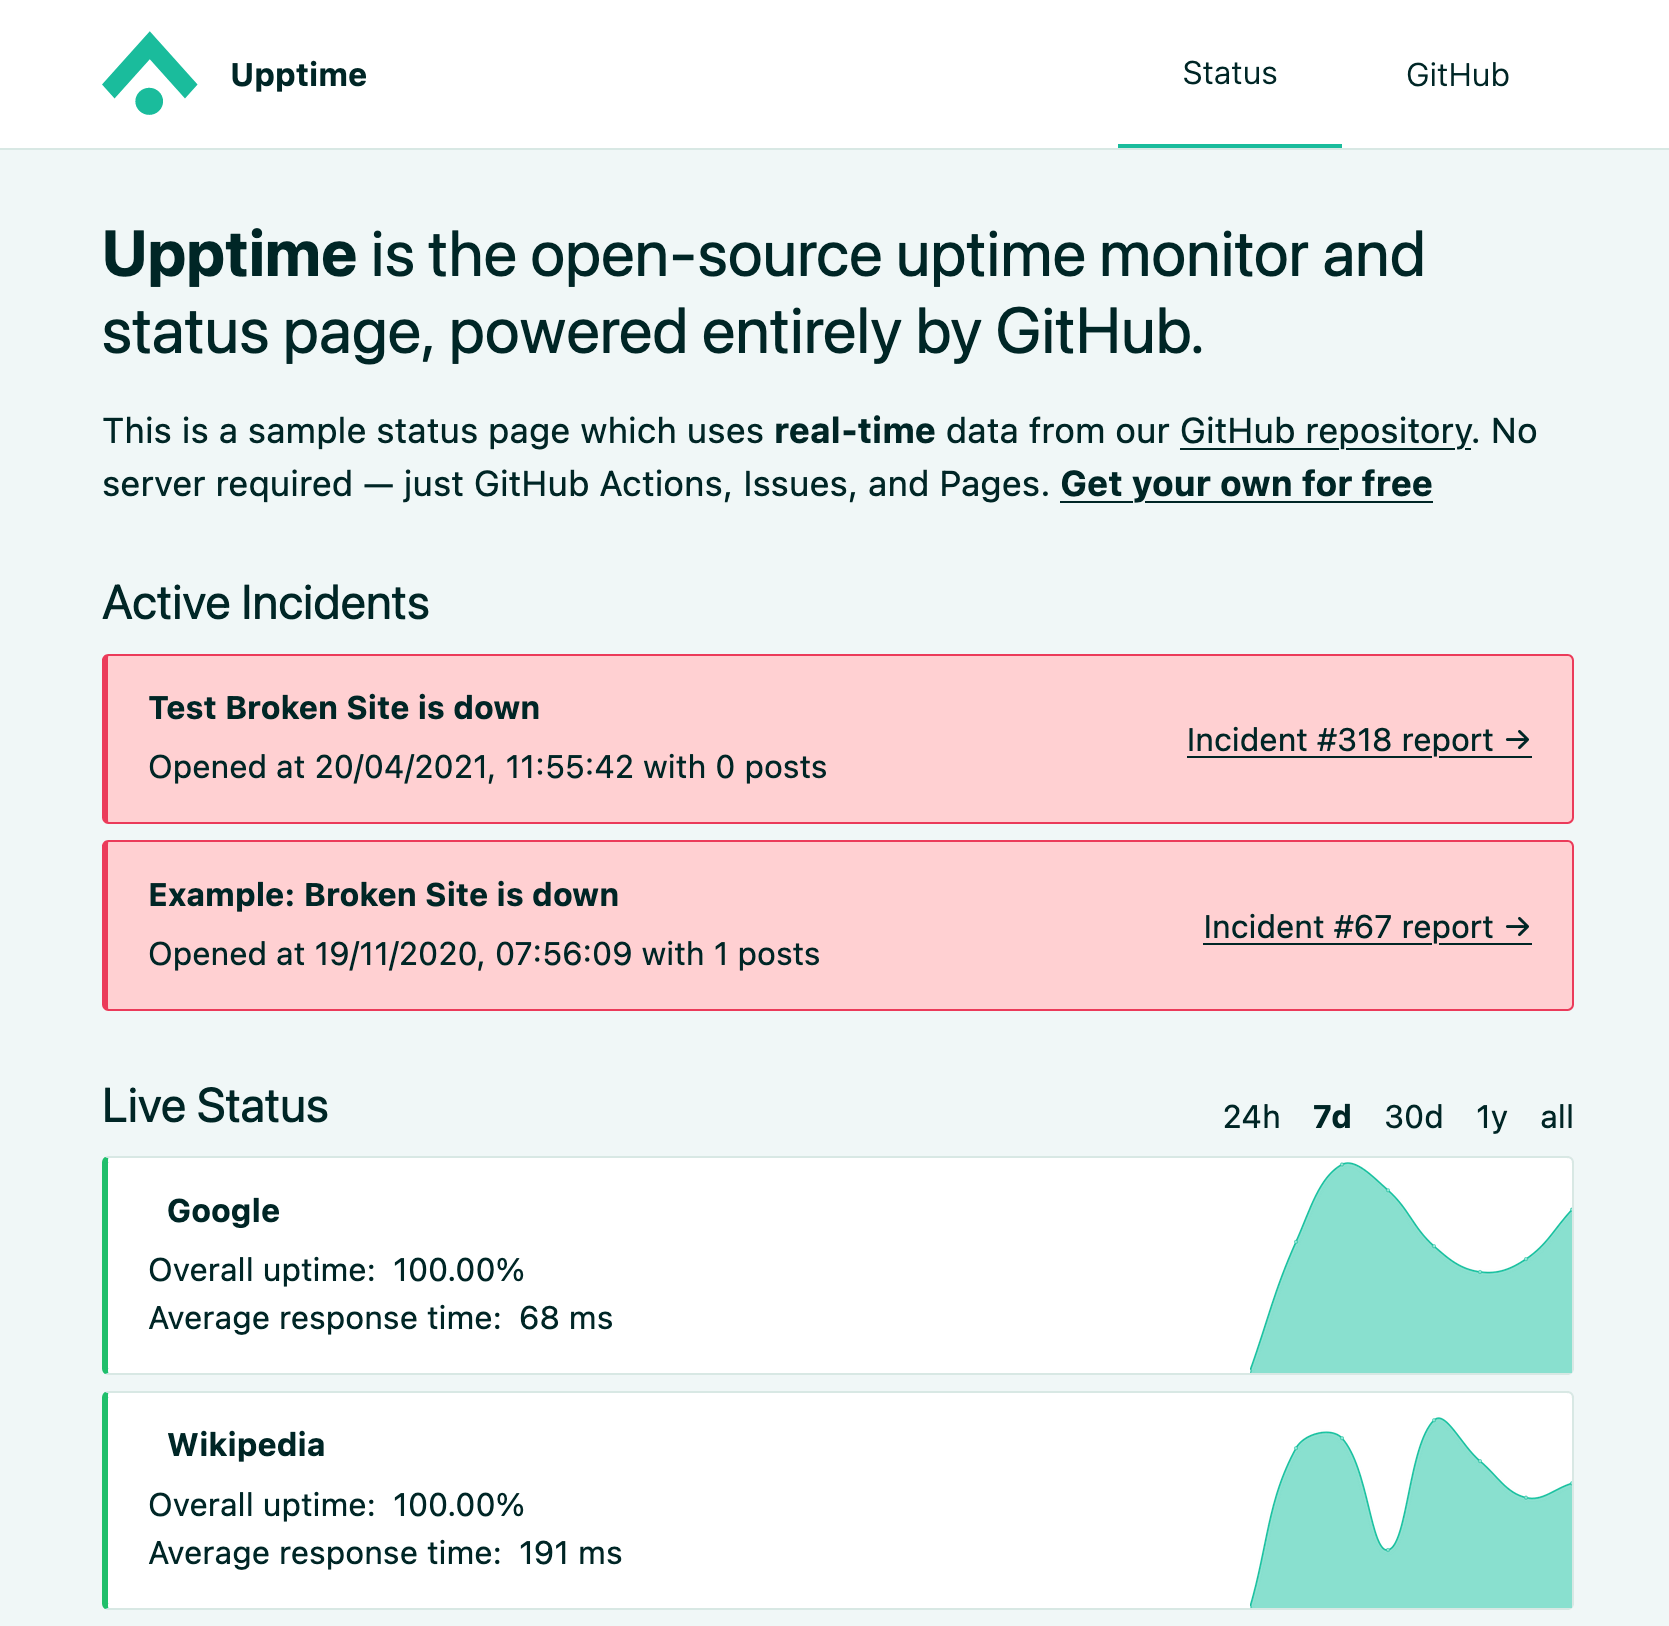 Upptime status page example